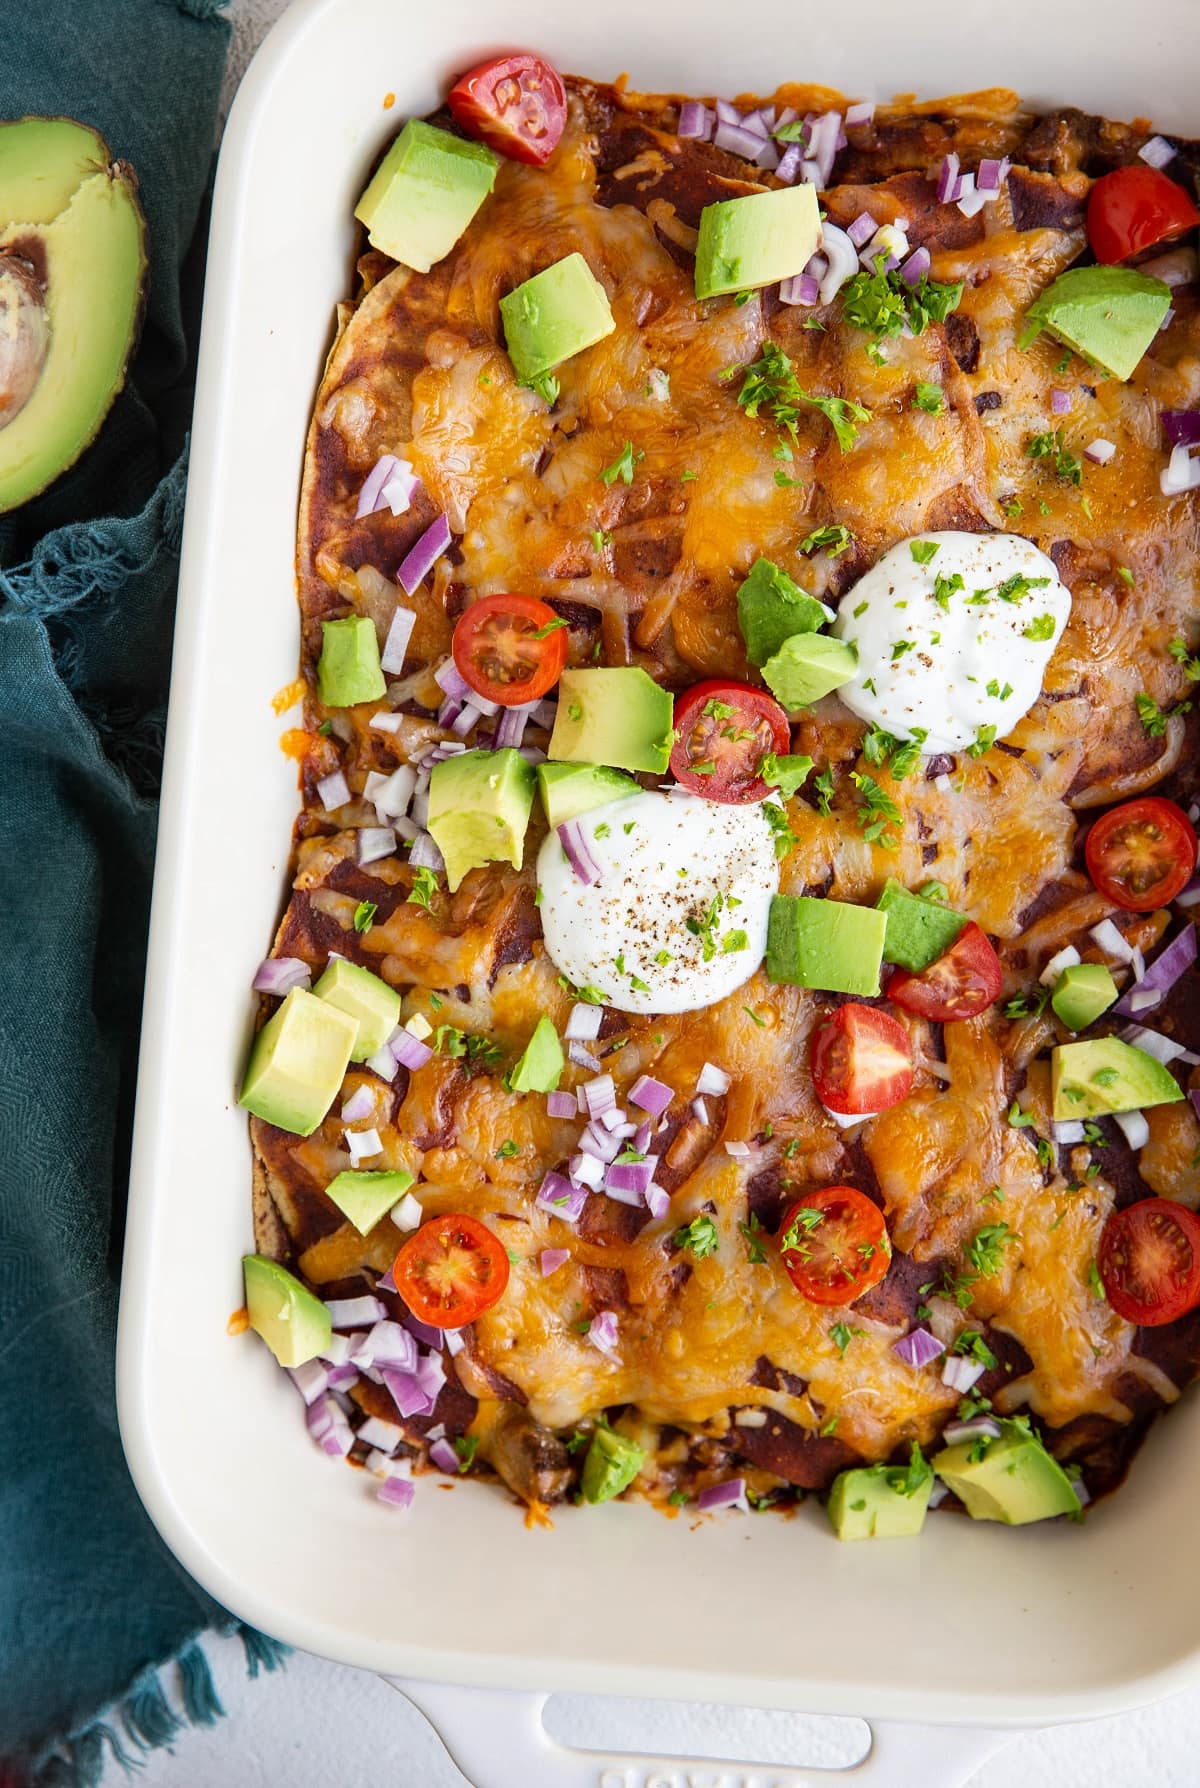 Casserole dish of enchilada casserole with avocado, sour cream, tomatoes and onions on top.